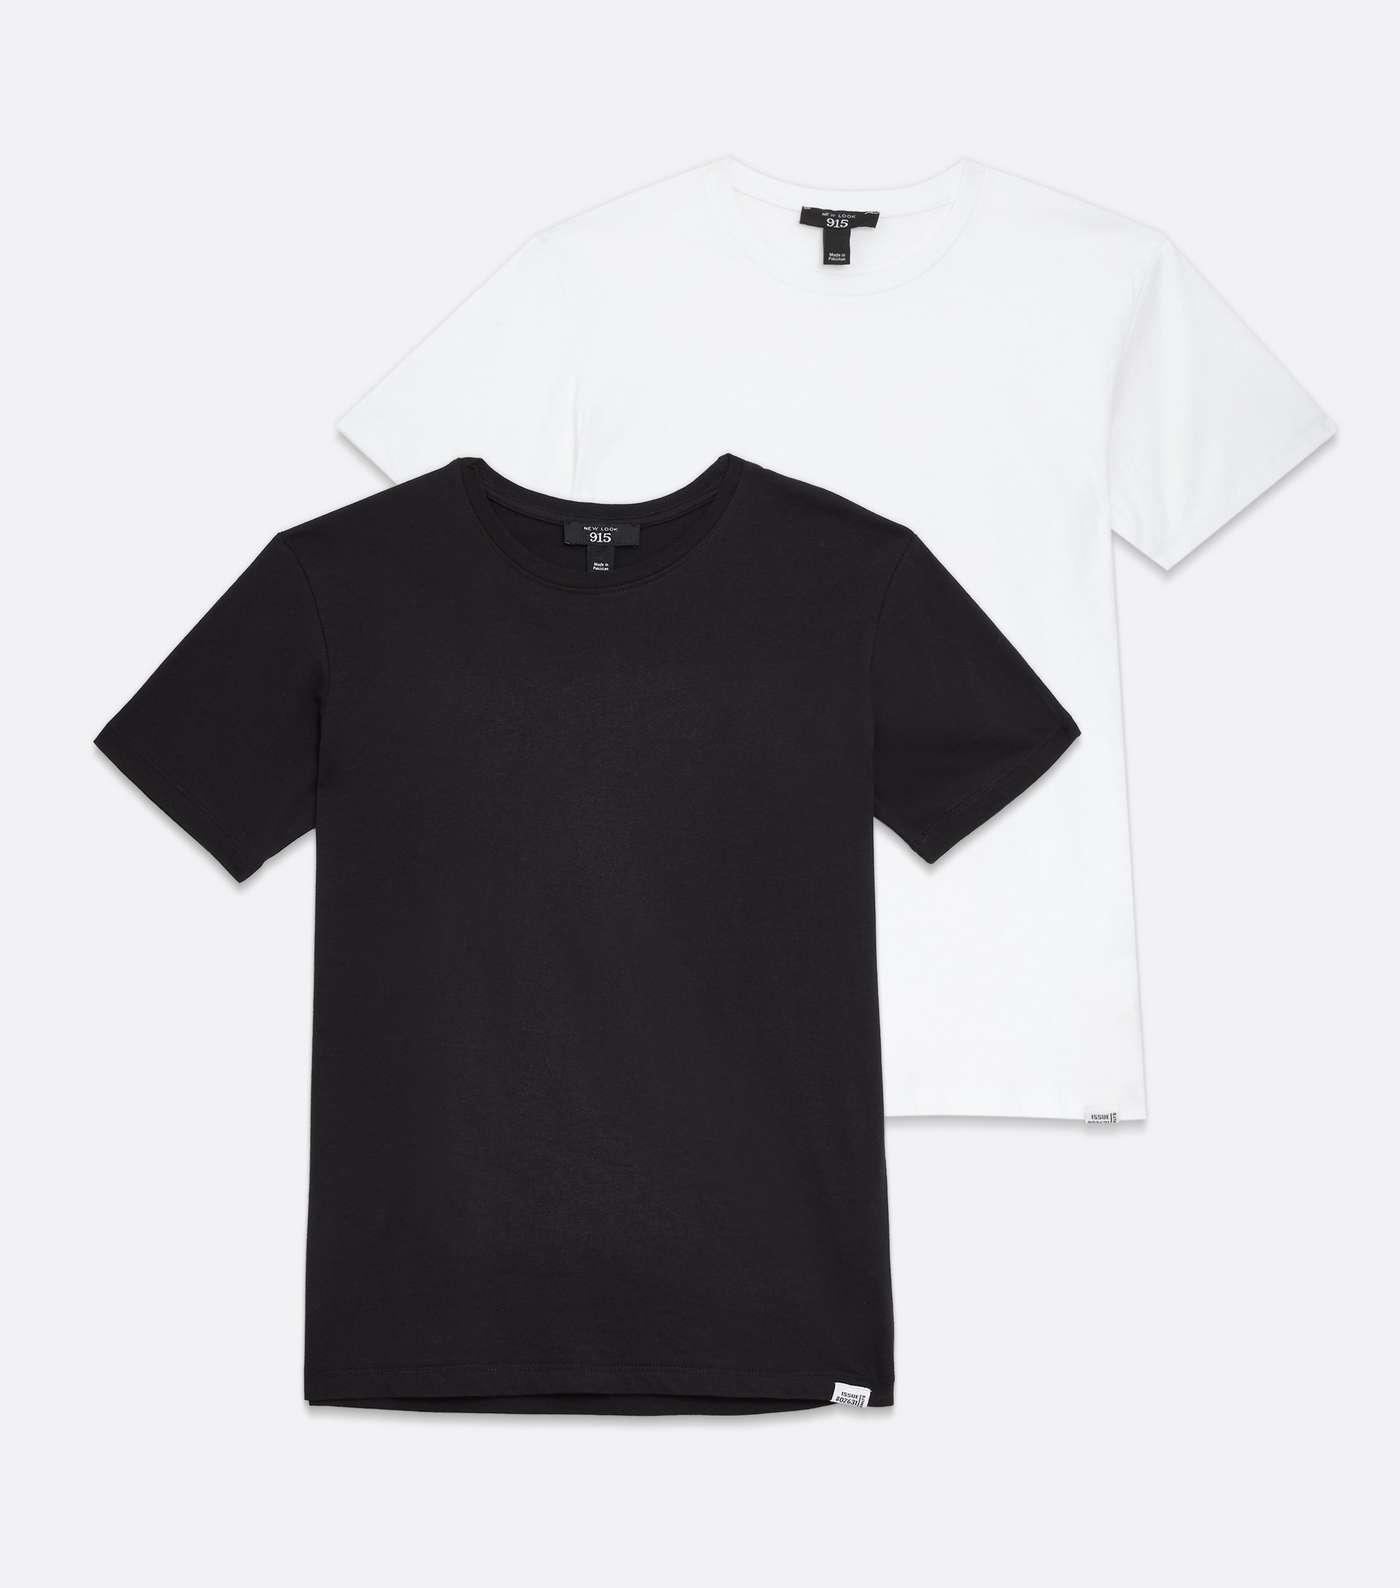 Boys 2 Pack Black and White T-Shirts Image 5